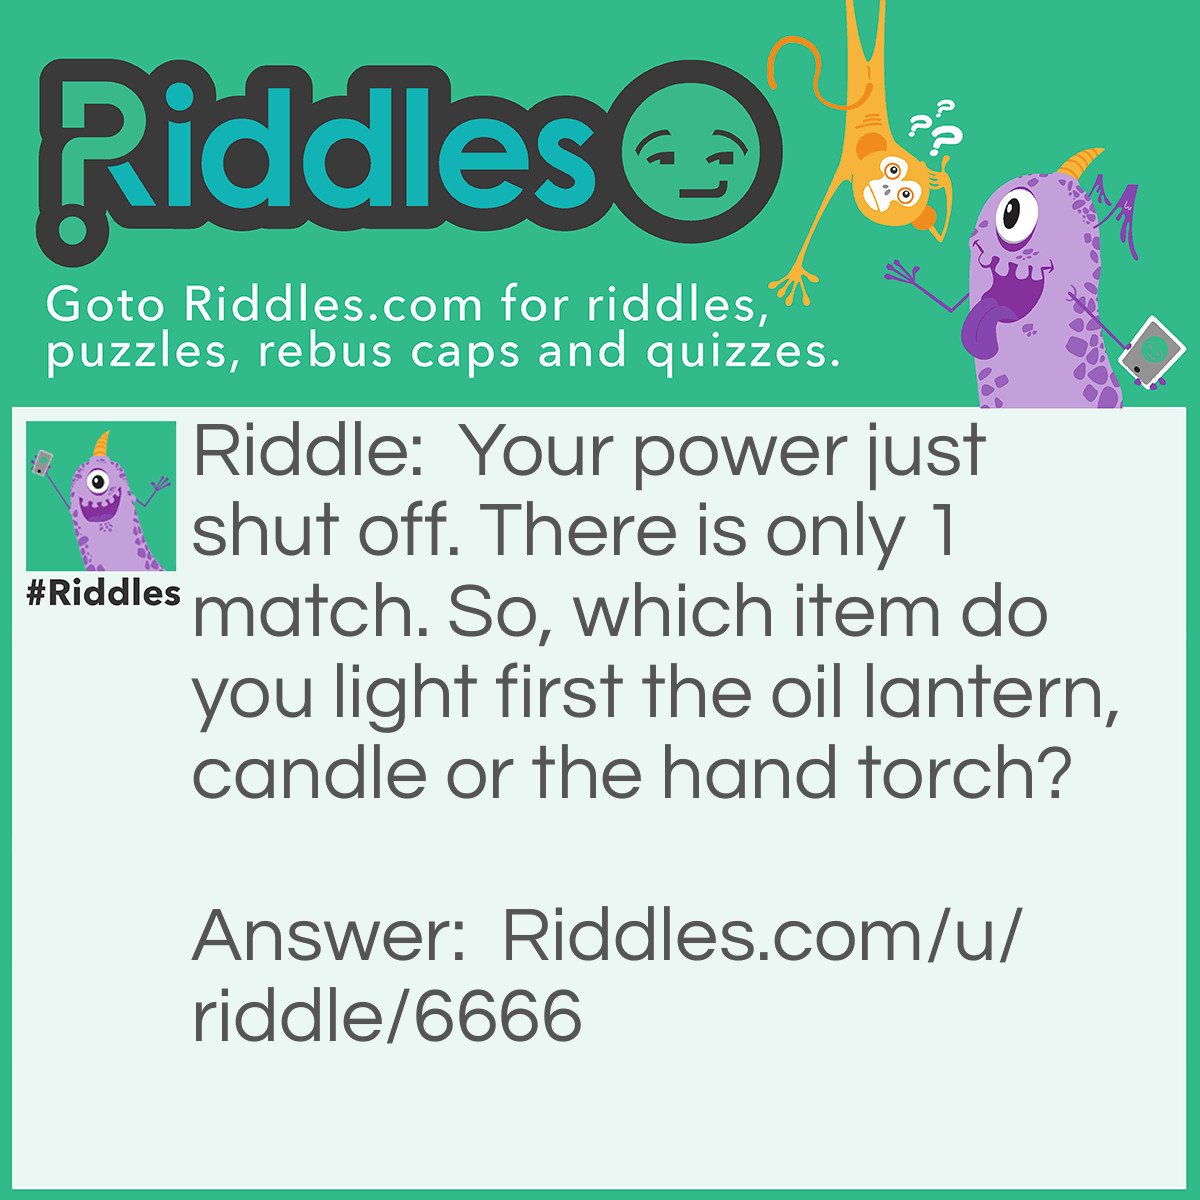 Riddle: Your power just shut off. There is only 1 match. So, which item do you light first the oil lantern, candle or the hand torch? Answer: The match!